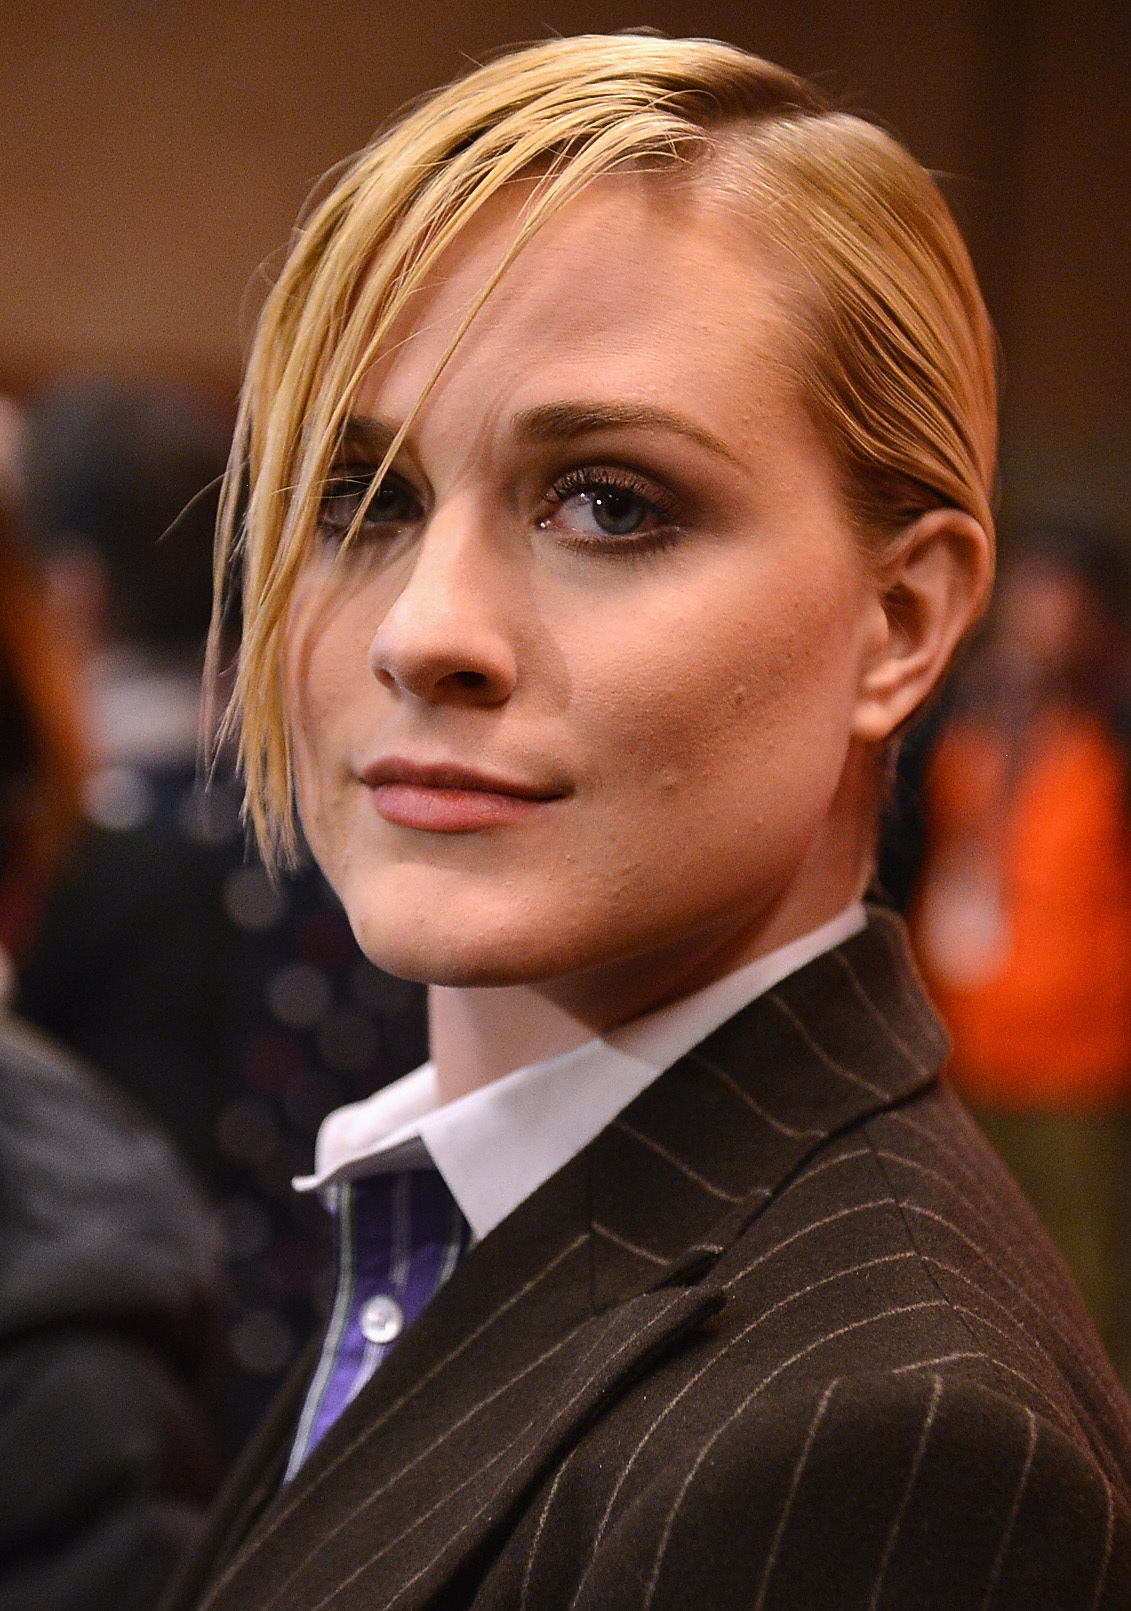 Evan Rachel Wood at event of The Necessary Death of Charlie Countryman (2013)